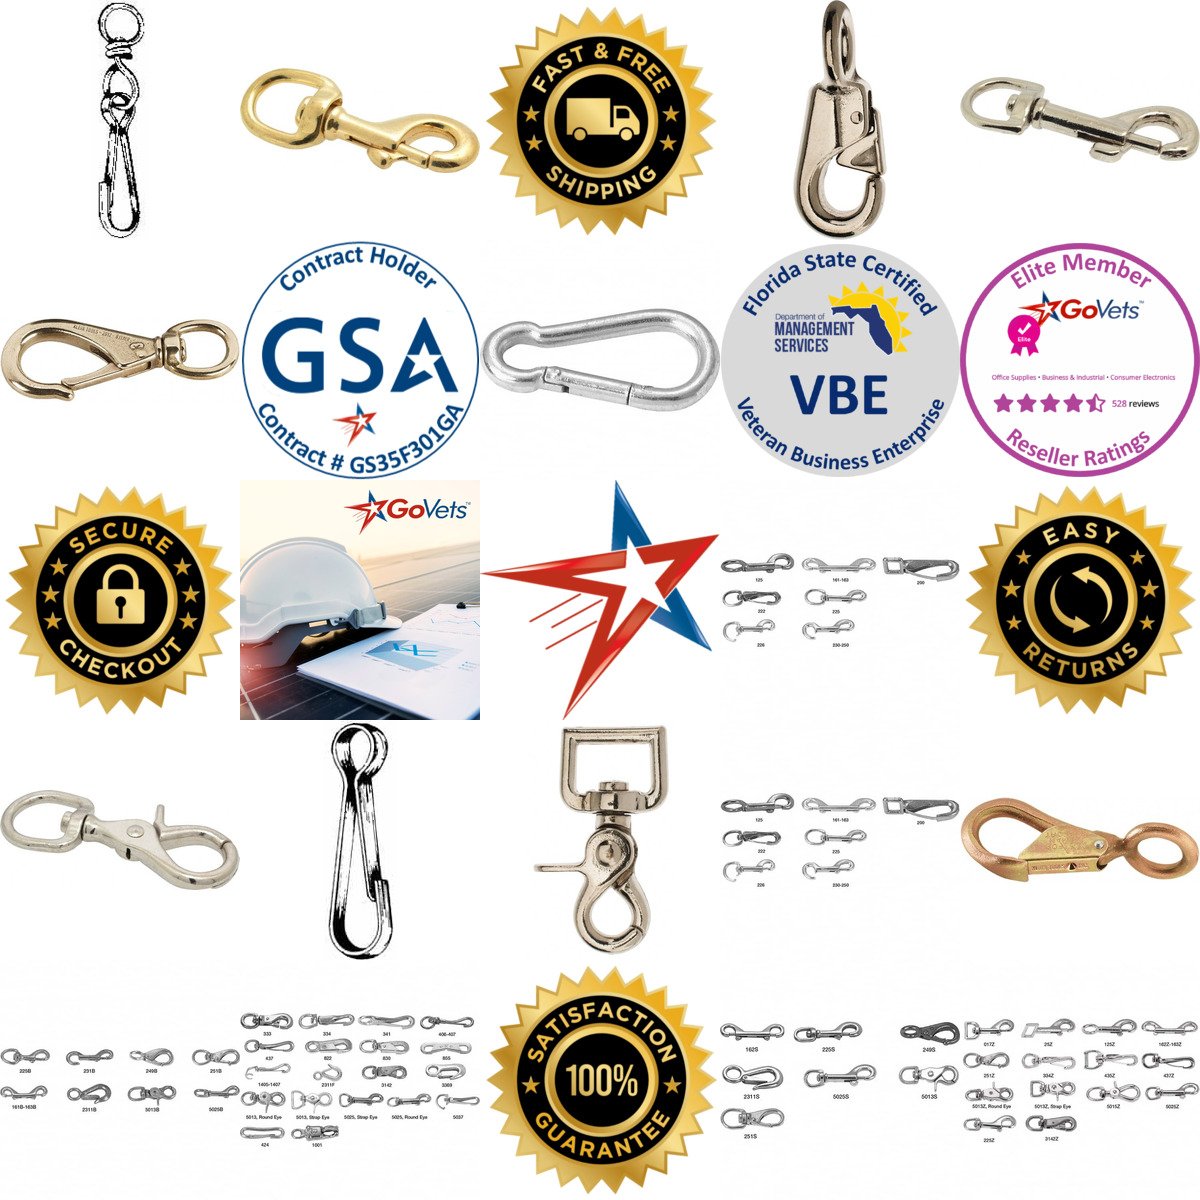 A selection of Snaps products on GoVets